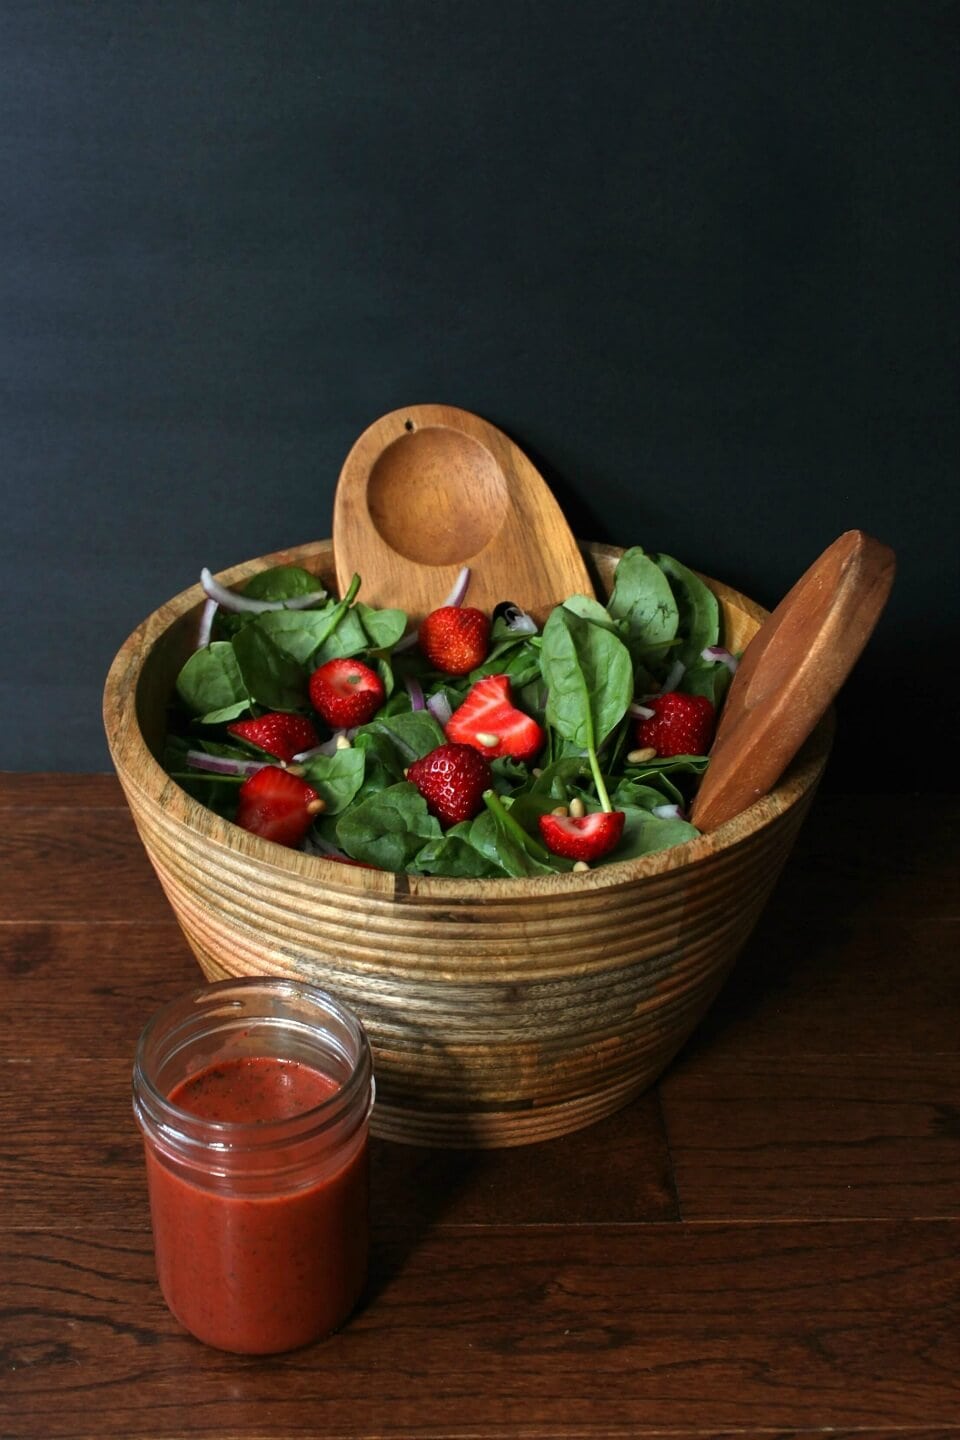 A wooden bowl containing green baby spinach, red strawberries, pine nuts and red onions.